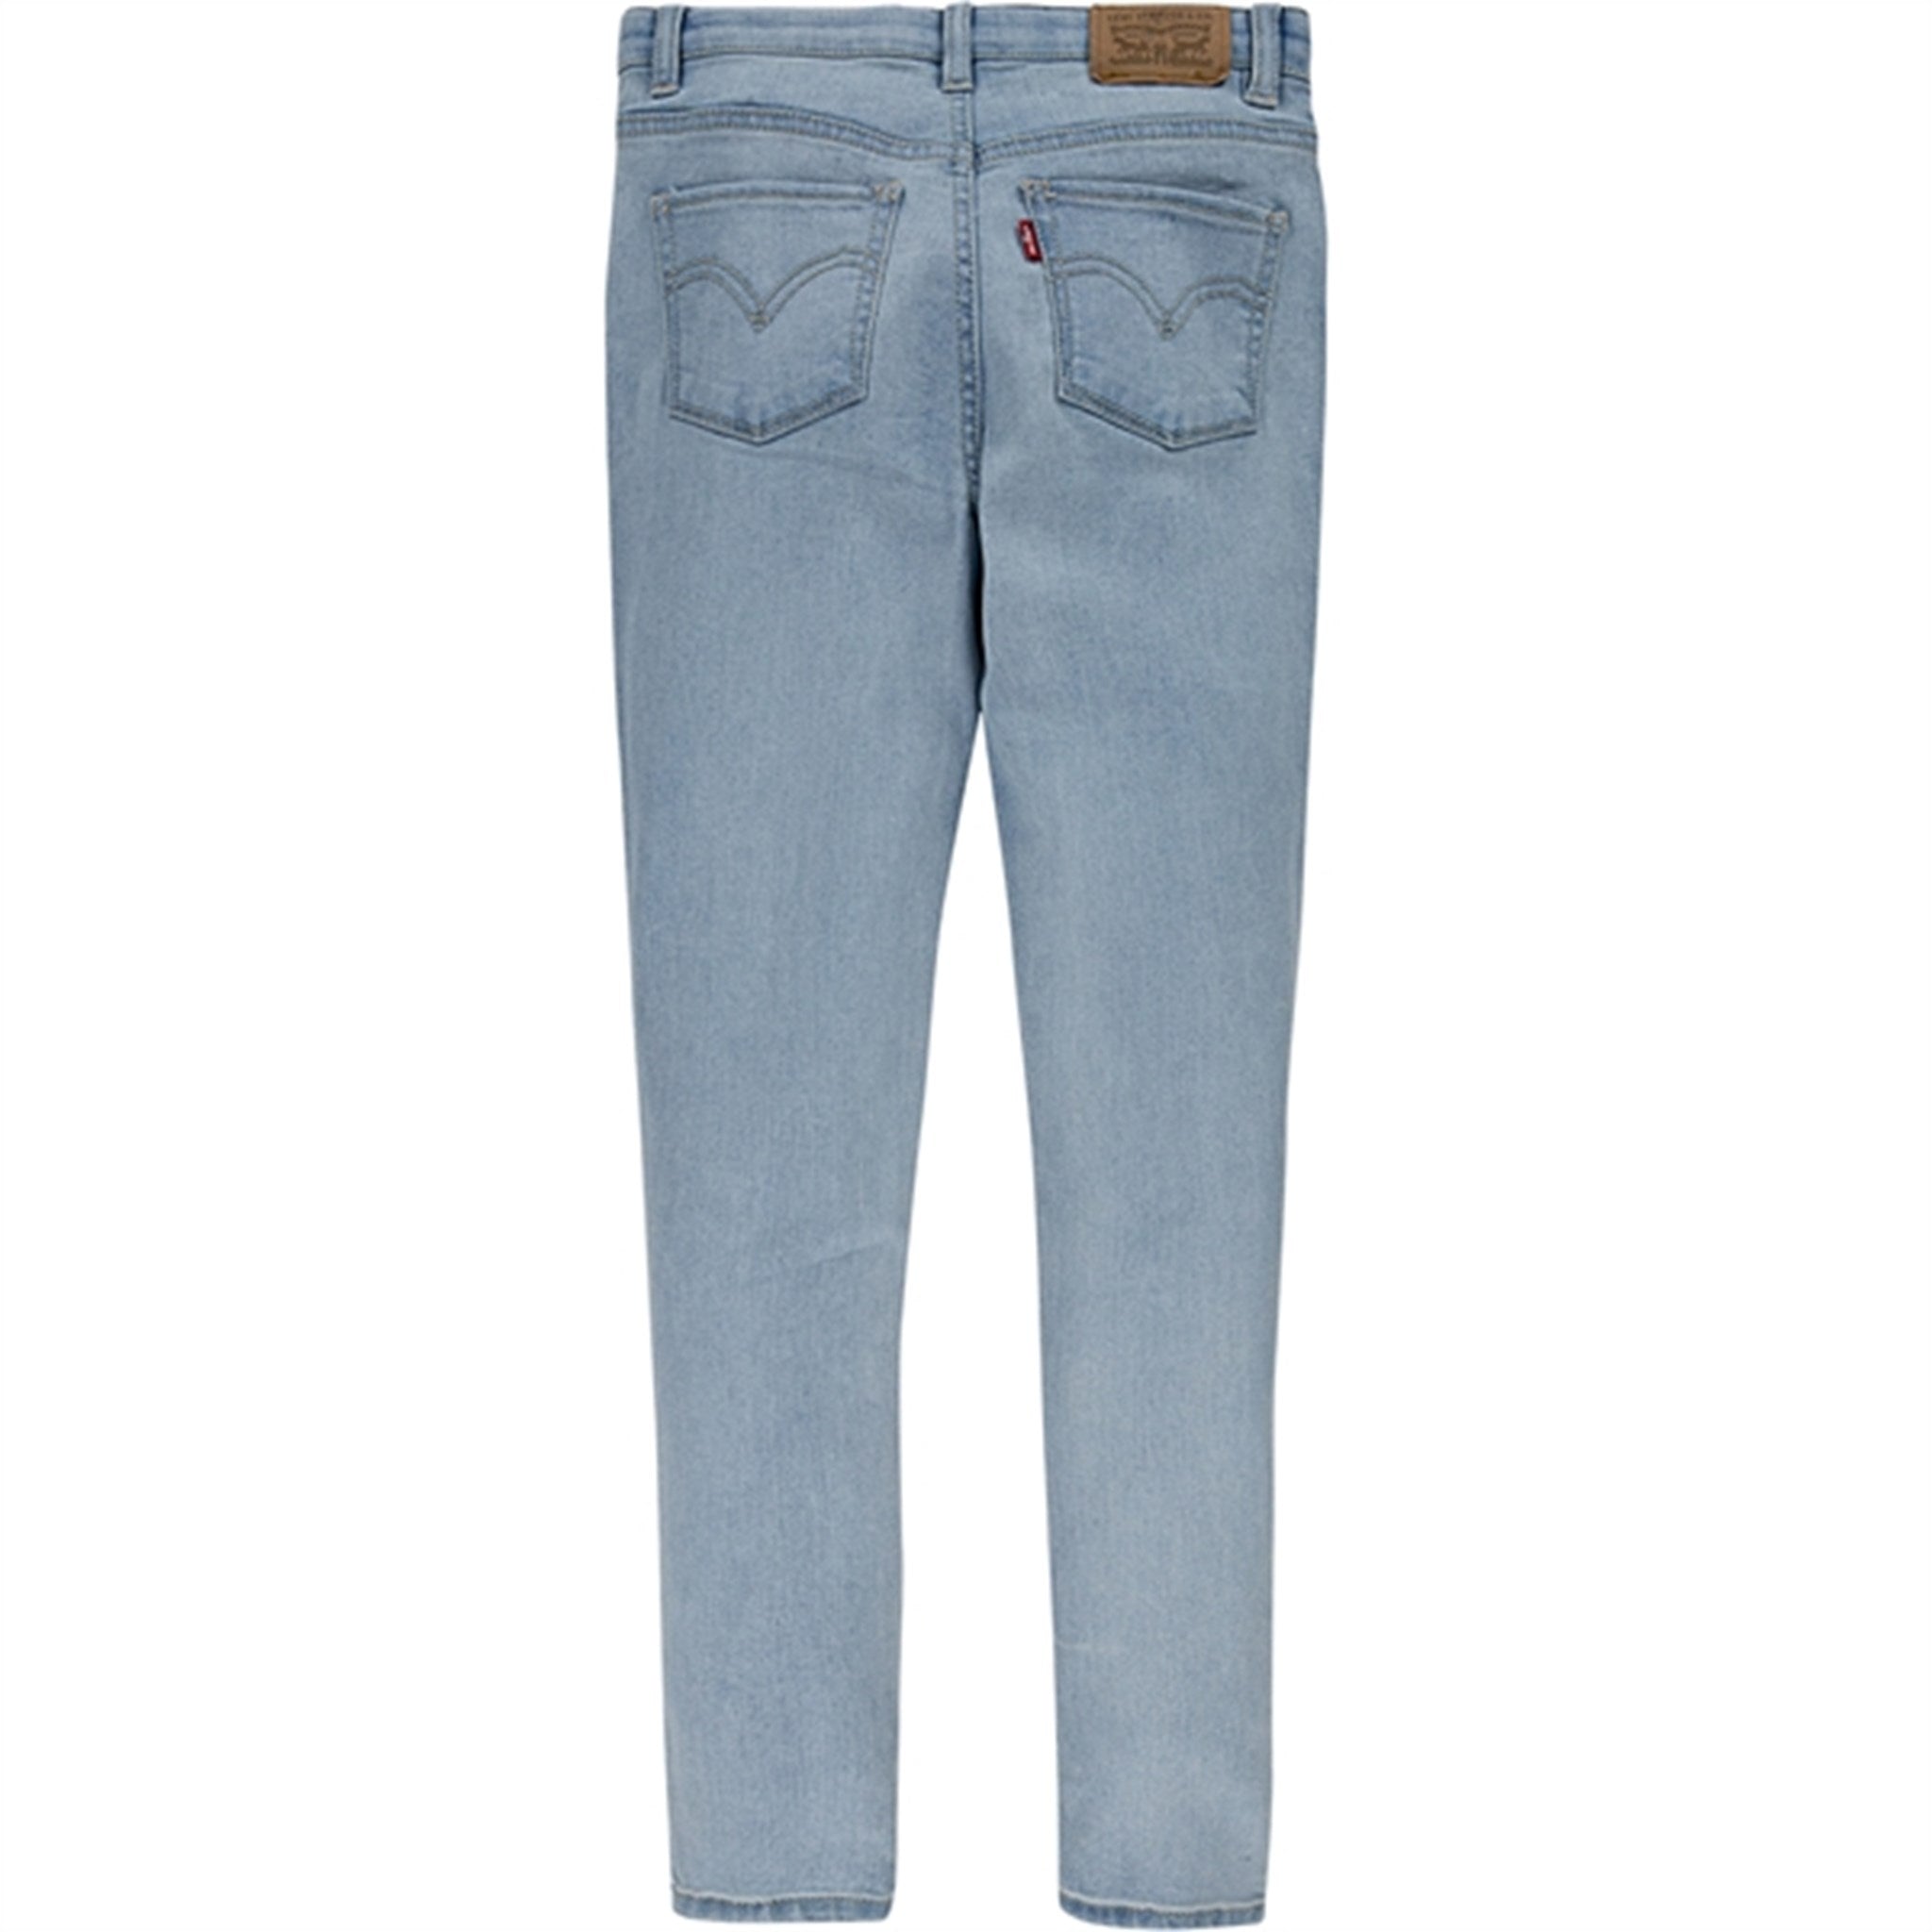 Levi's 720 High Rise Super Skinny Jeans French Prince